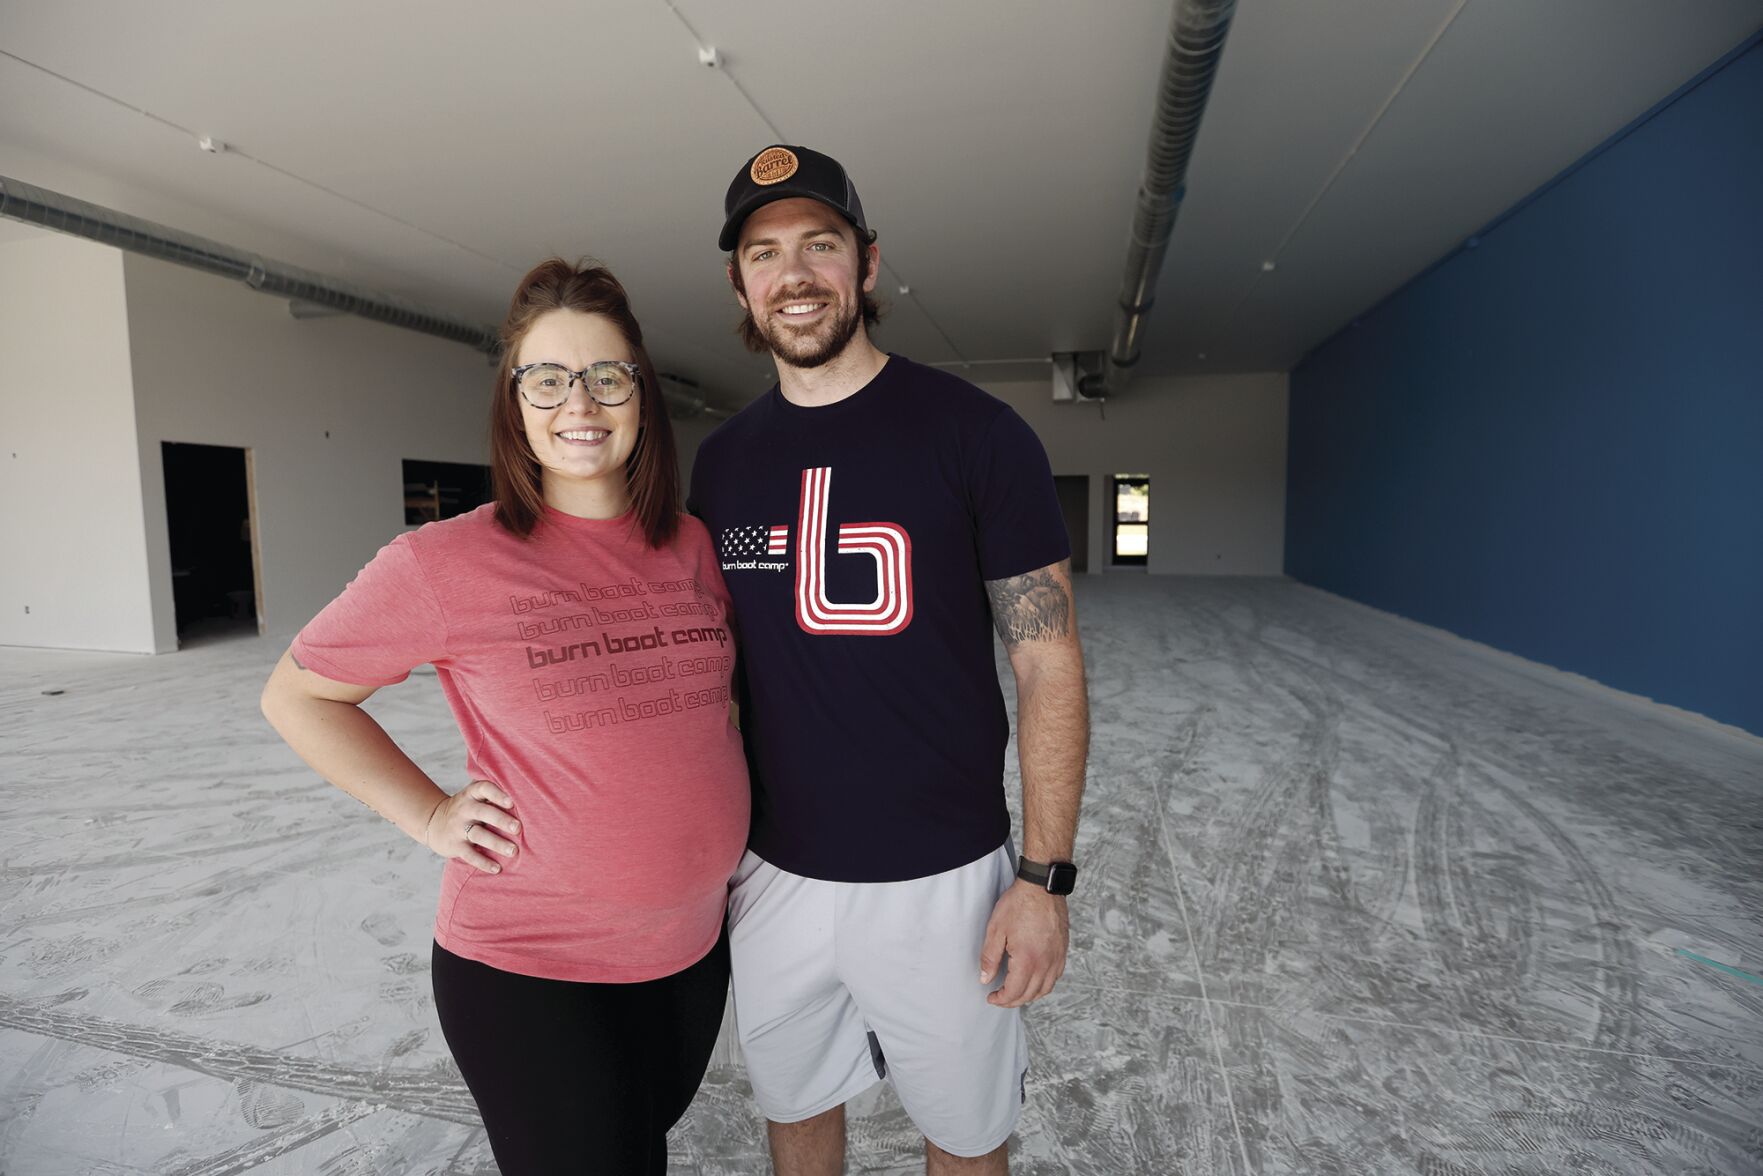 Owners Tiffany Raisbeck and Kyle Hoppman, of Mount Horeb, Wis., will open Burn Boot Camp in Dubuque.    PHOTO CREDIT: JESSICA REILLY